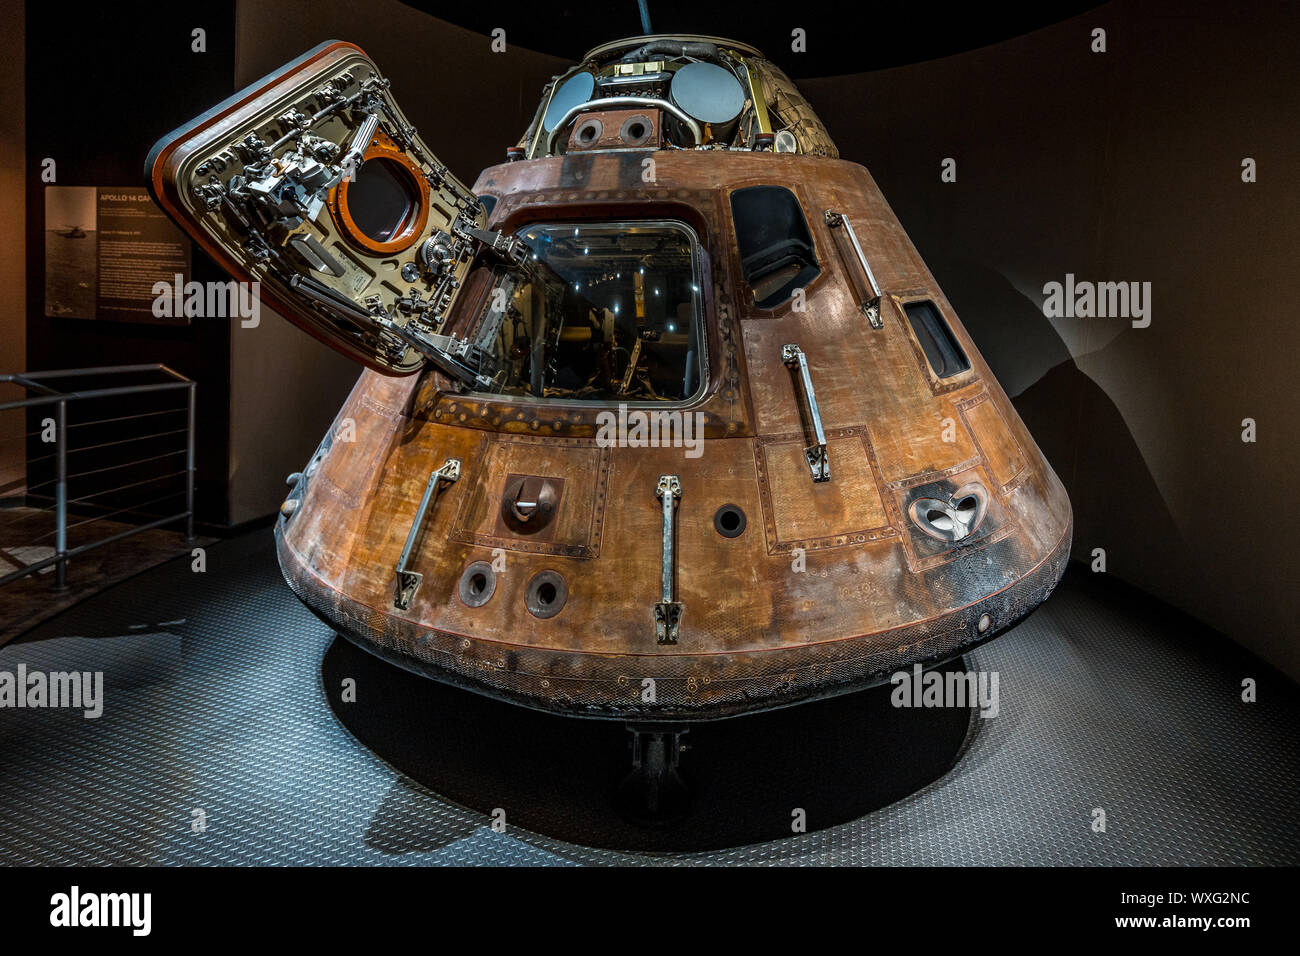 Cape Canaveral, Florida, USA - Space capsule for astronauts Stock Photo